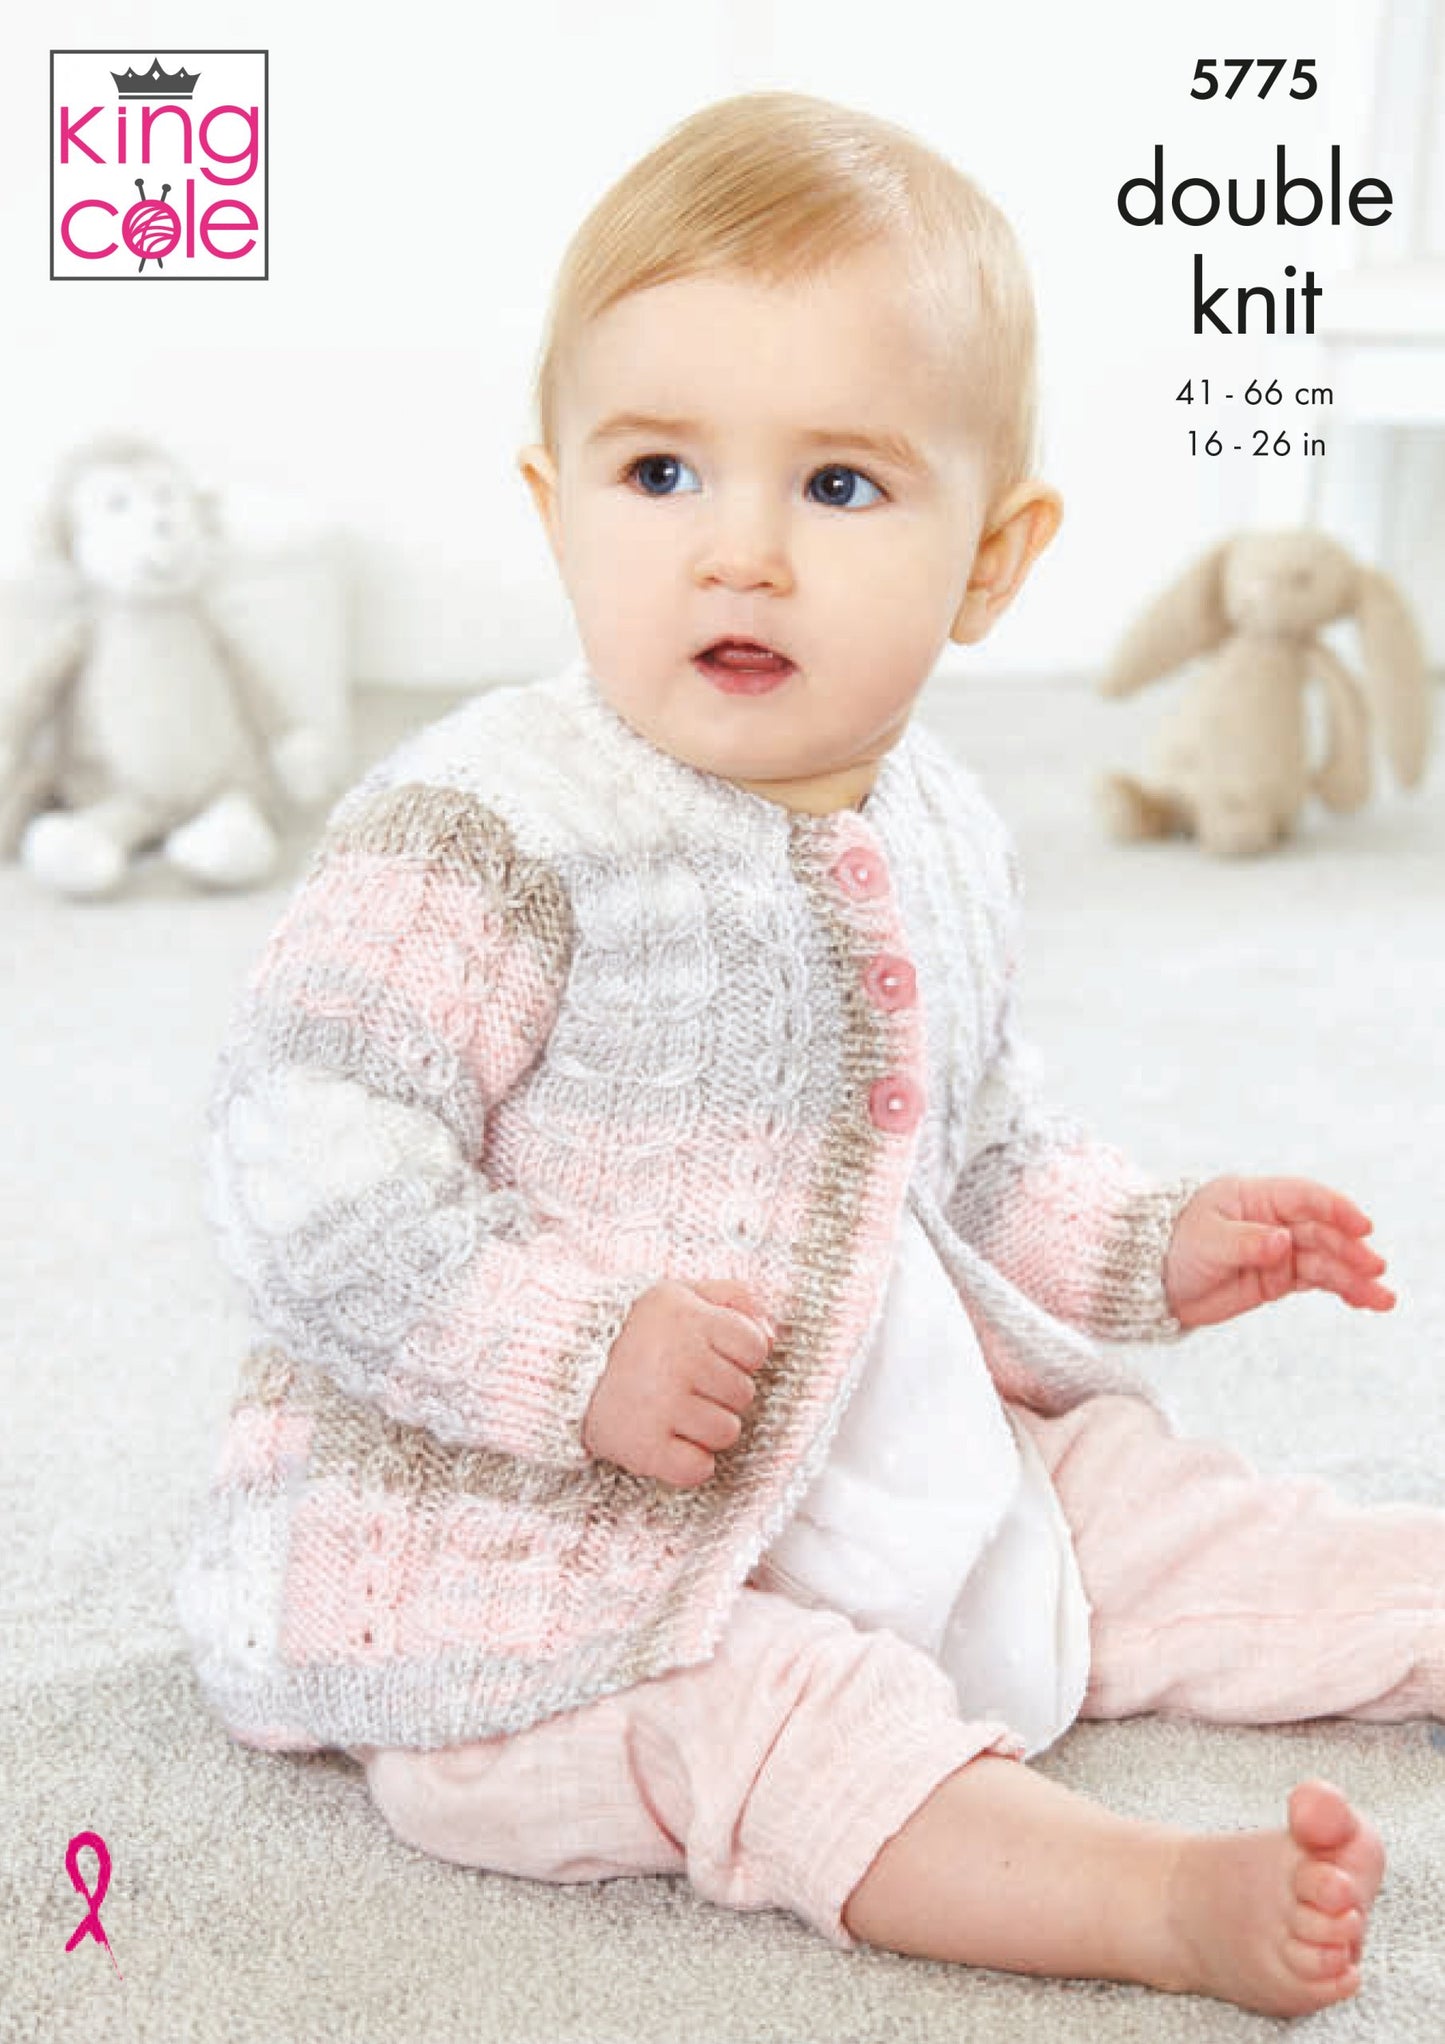 Knitting Pattern 5775 - Cardigan and Tunic: Knitted in Baby Pure DK